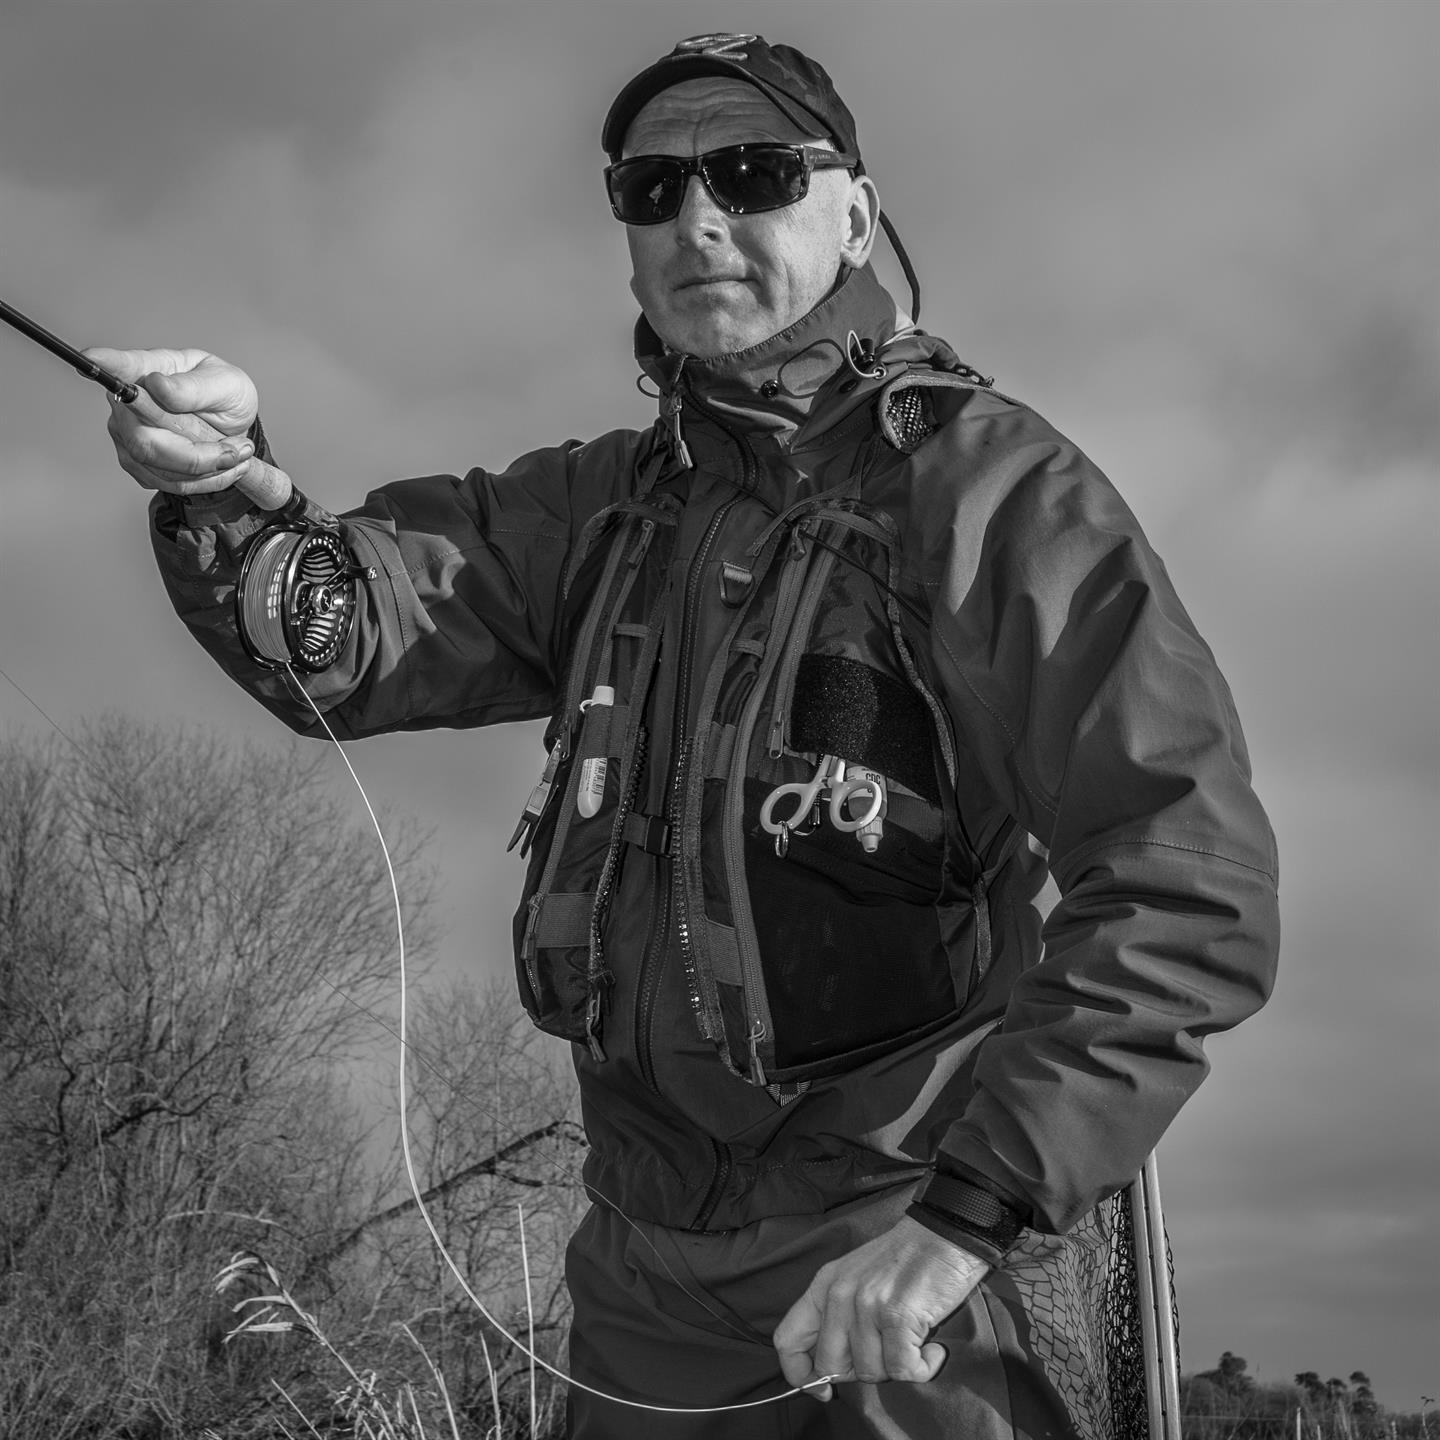 Fly Fishing Vest Guideline Experience